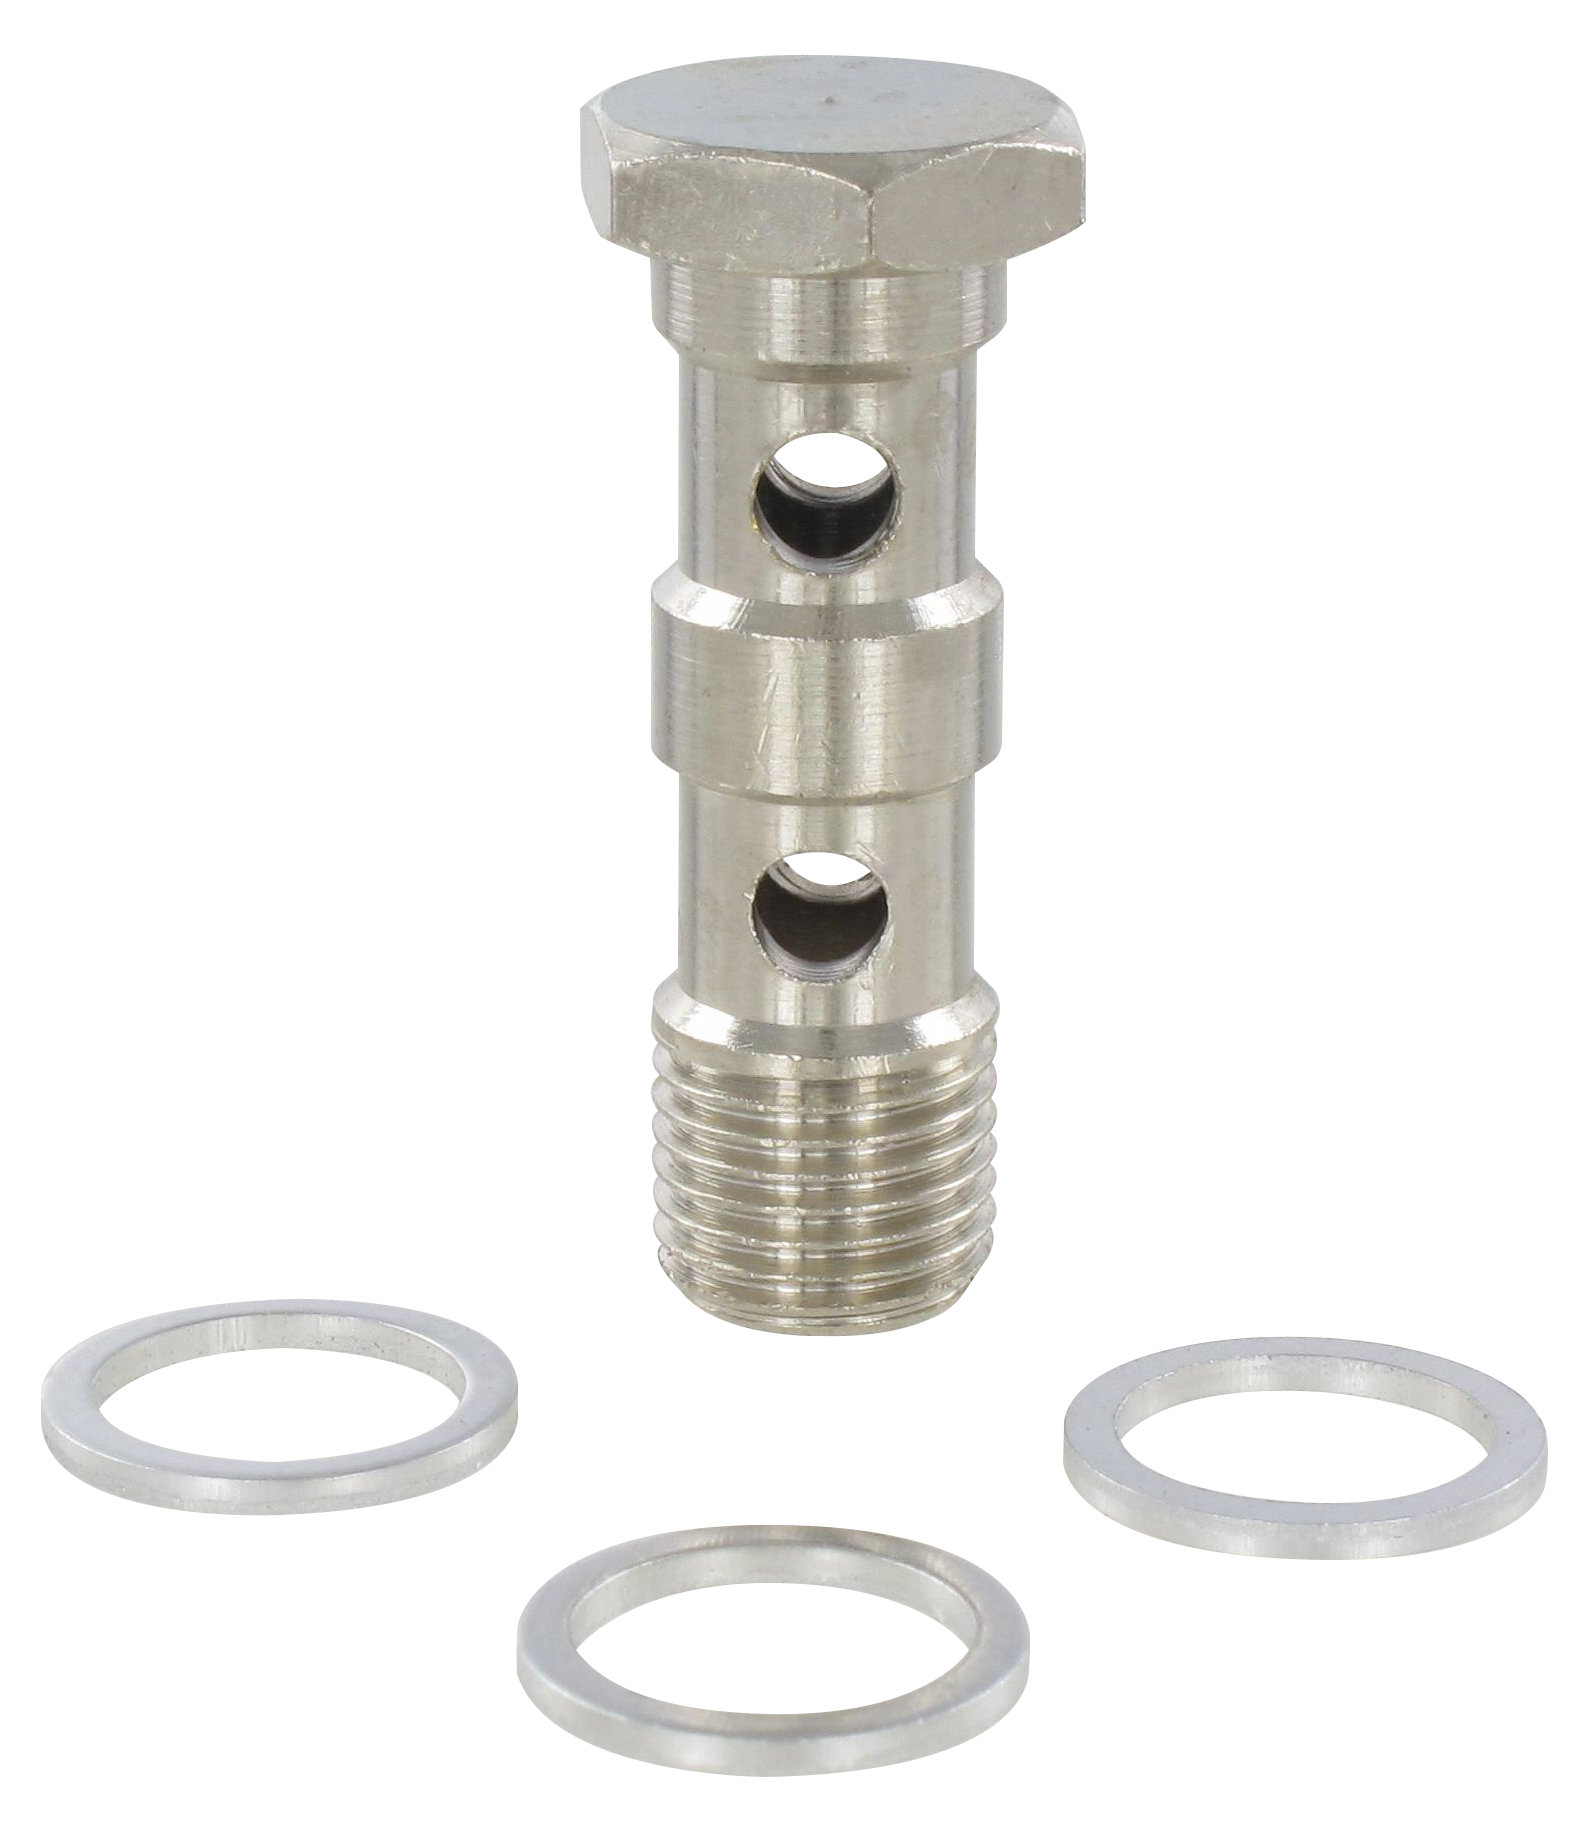 Banjo fittings DOUBLE HOLLOW BOLT COMPACT - Push-in fittings in acetalic resin